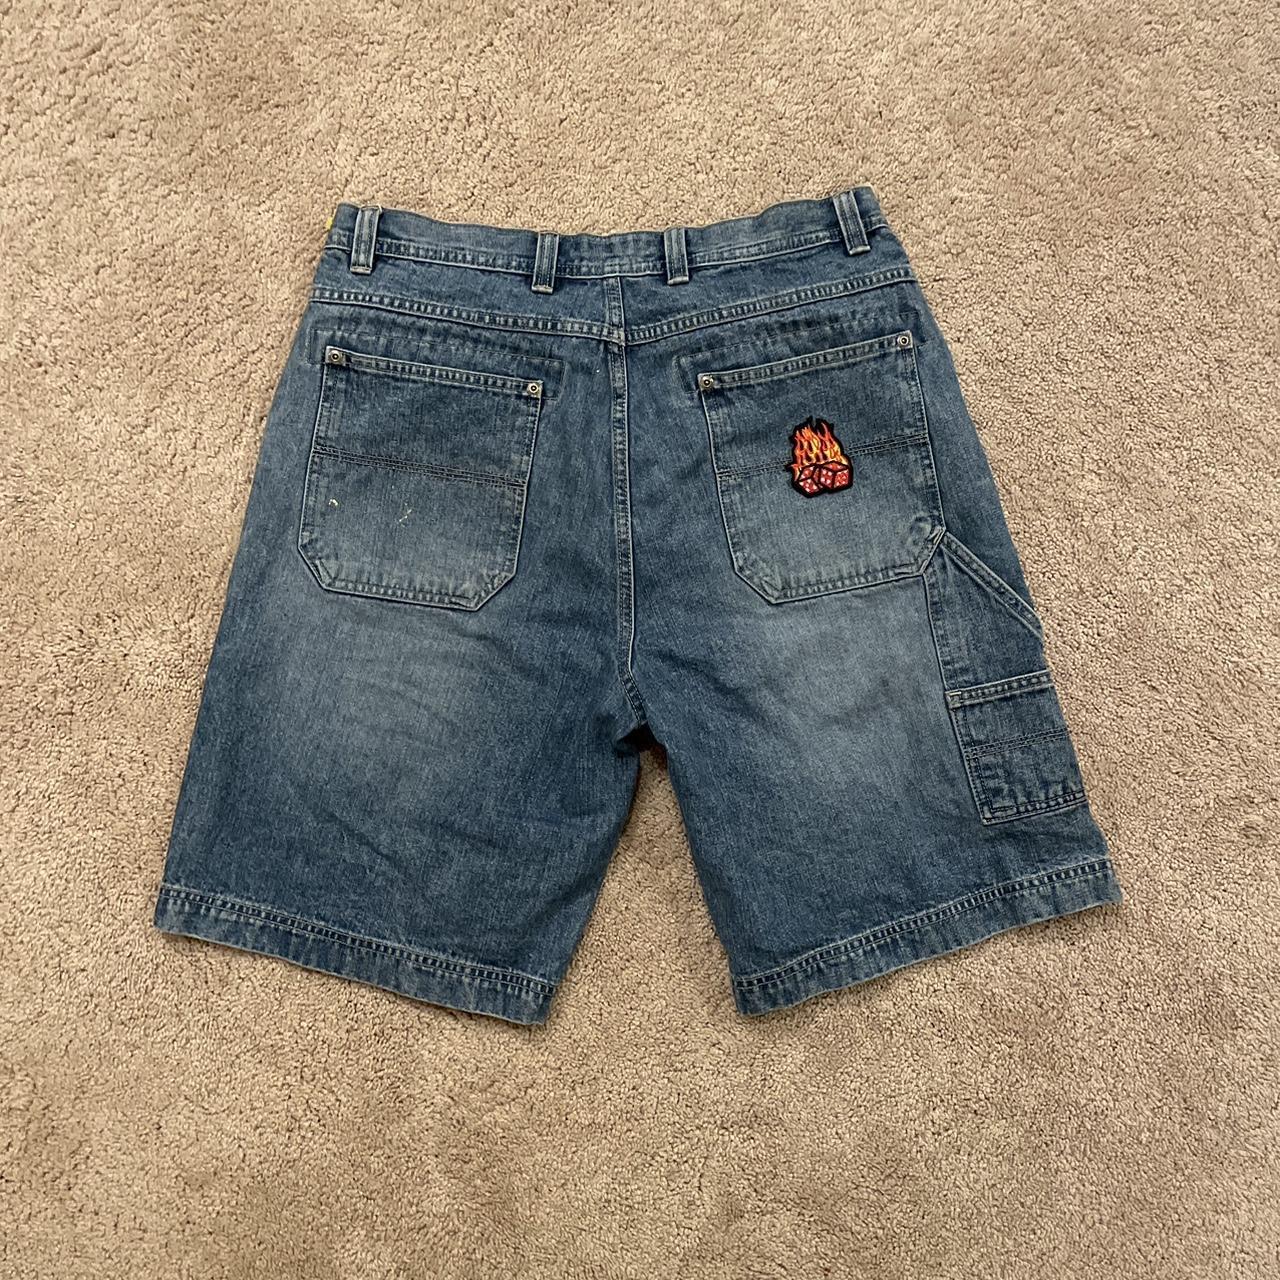 Embroidered jorts —— Great quality baggy fitting ... - Depop